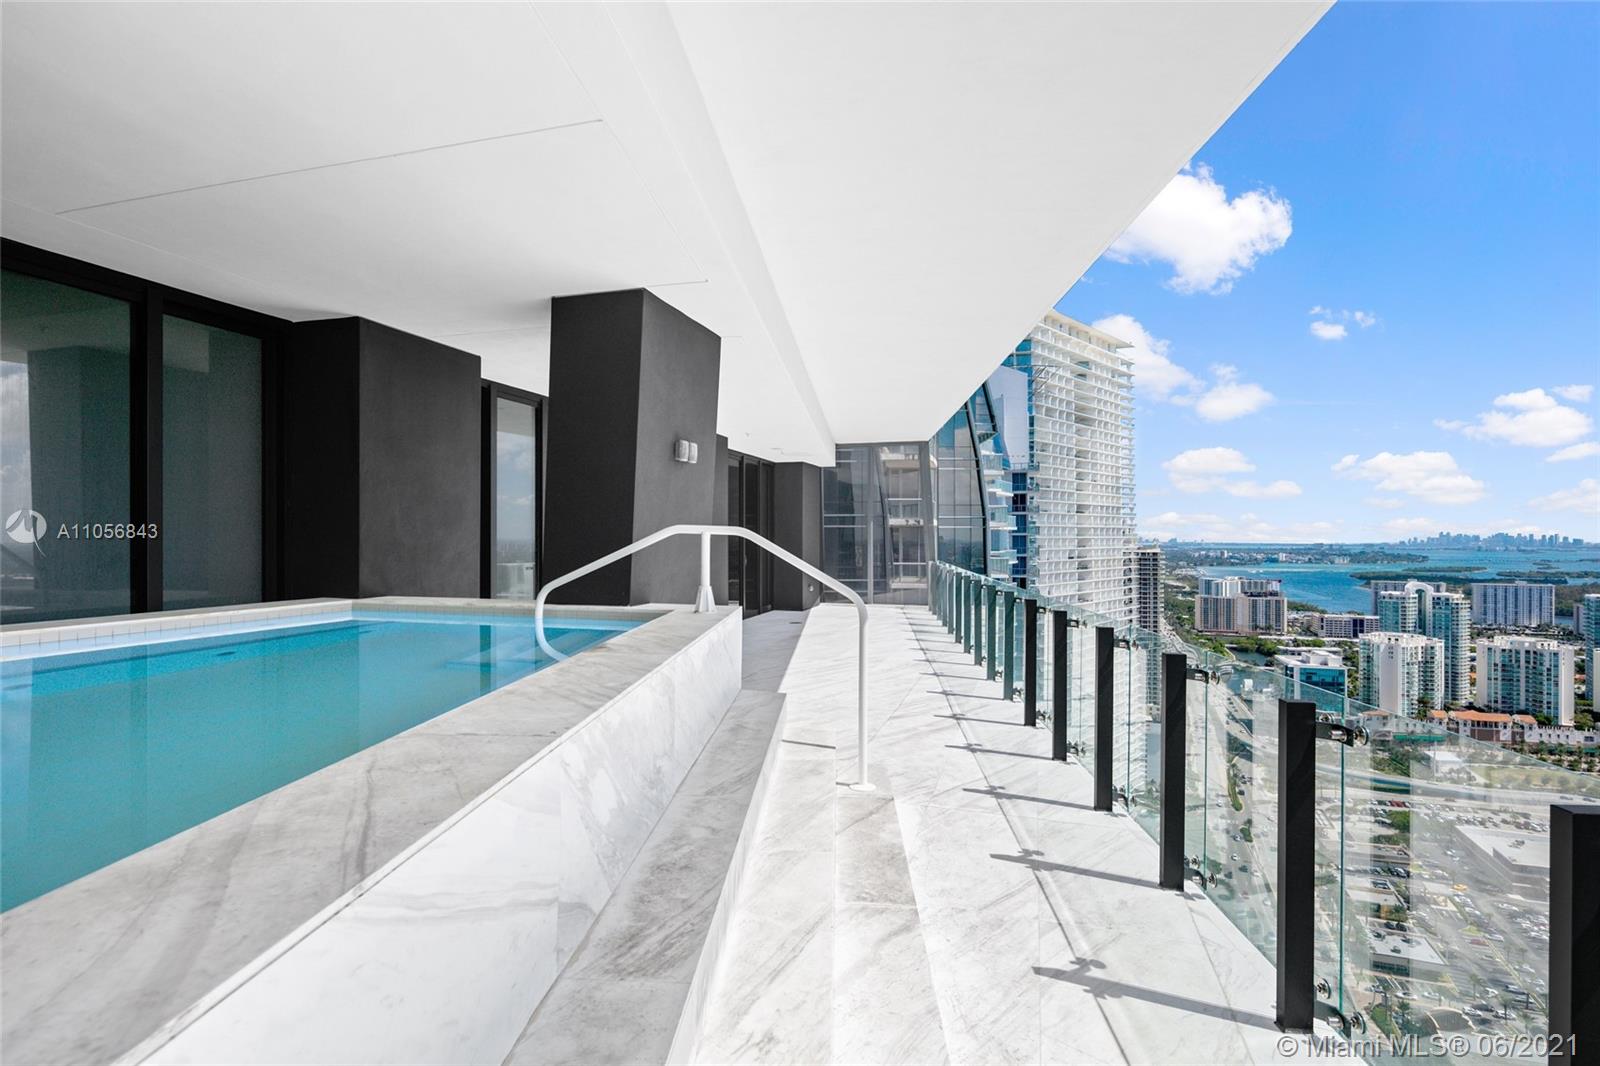 Second Unit Balcony With Private Pool